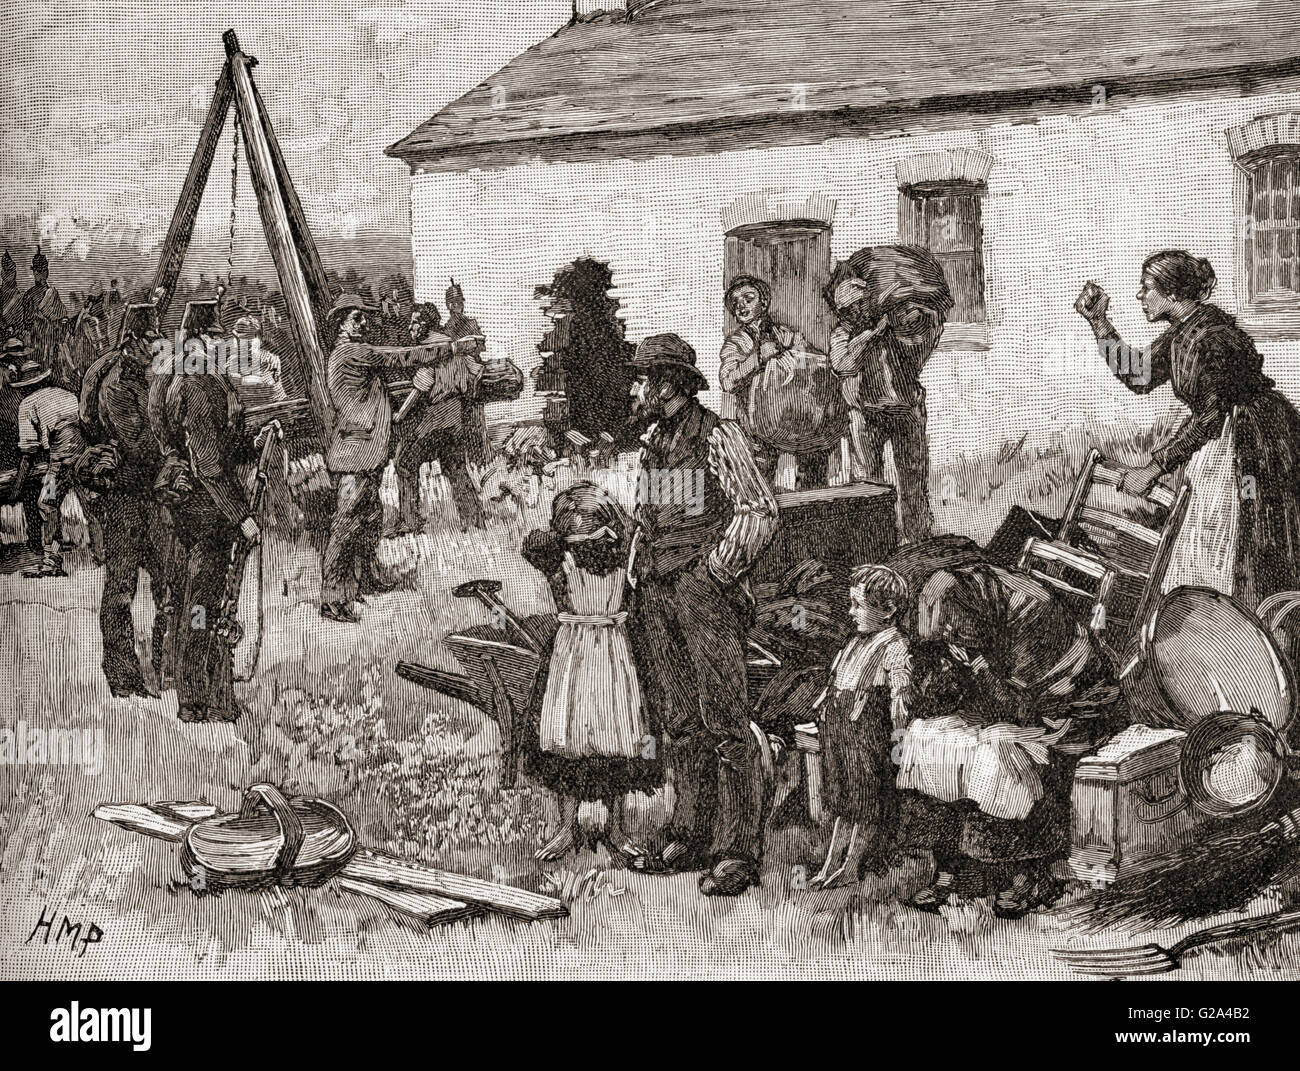 The Forgotten Tragedy: Irish Evictions in the 19th Century